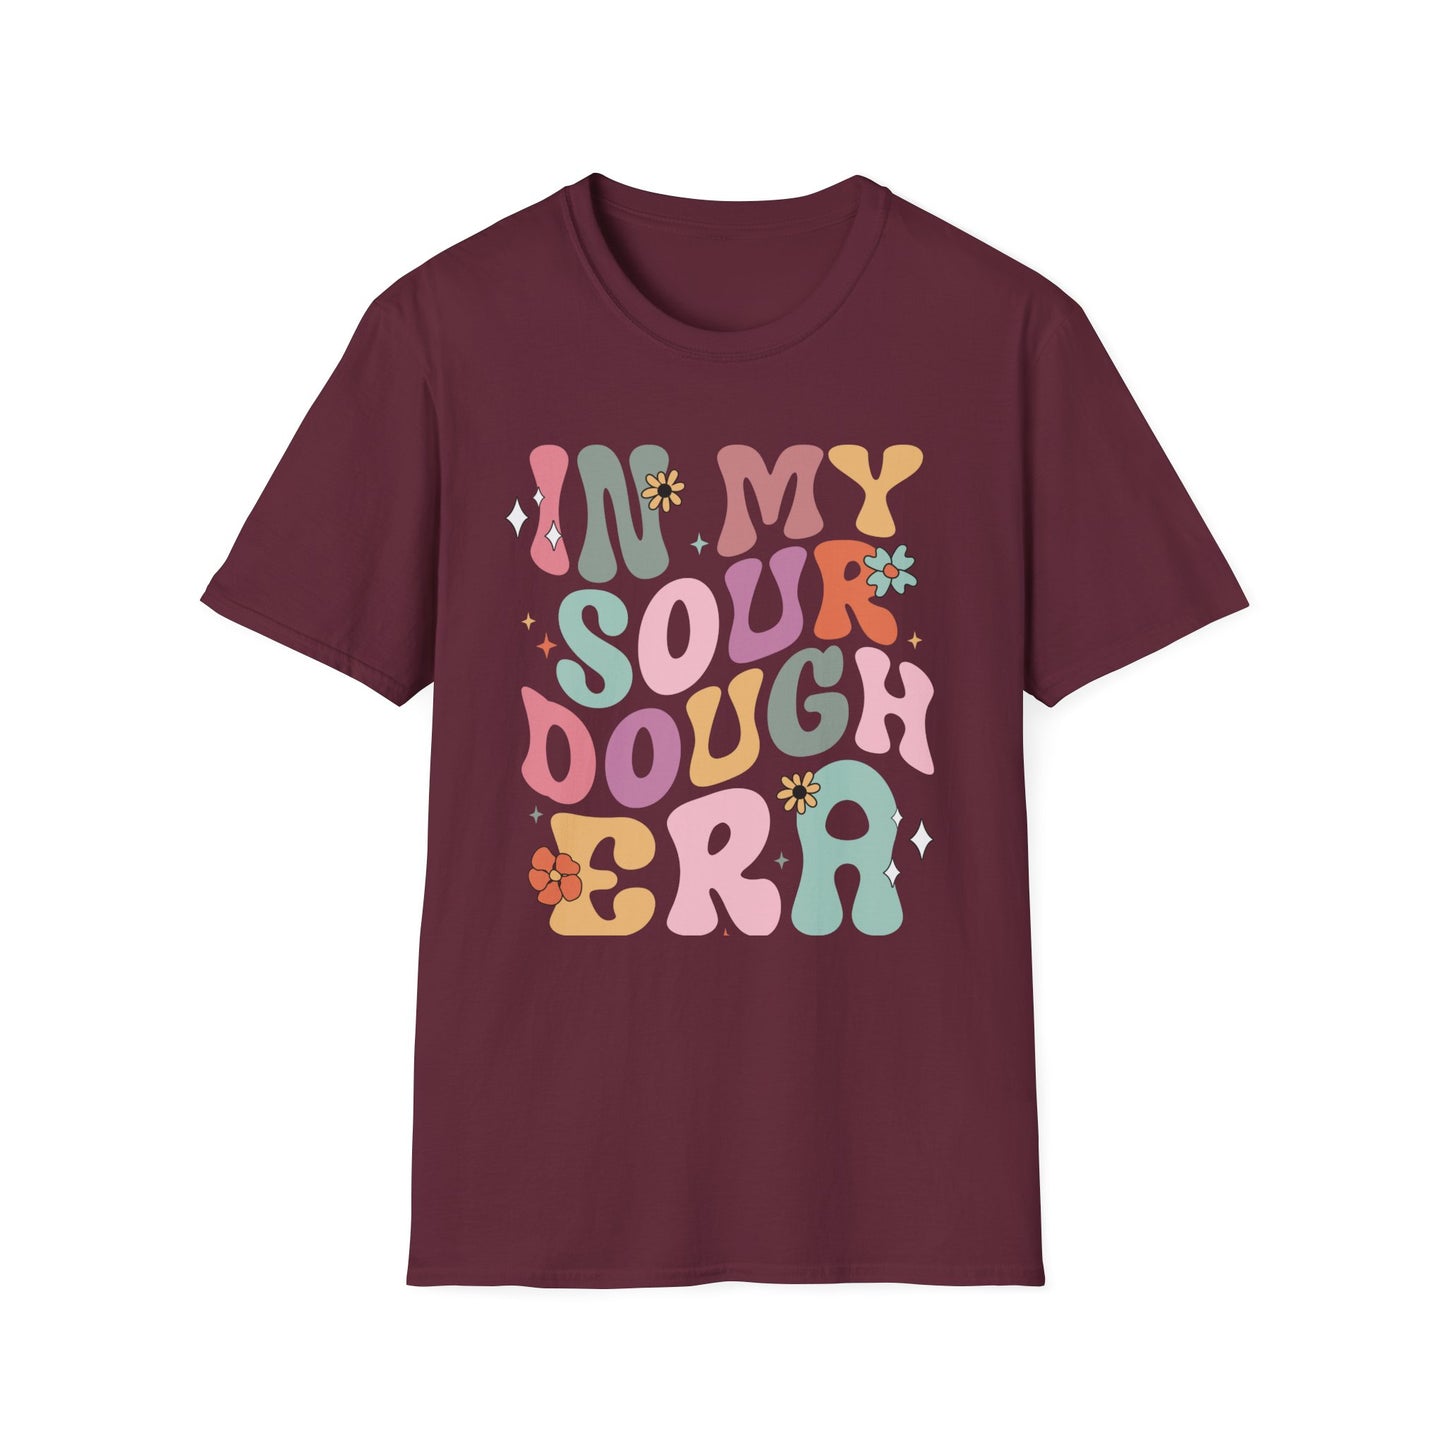 In my sour dough era Unisex Softstyle T-Shirt